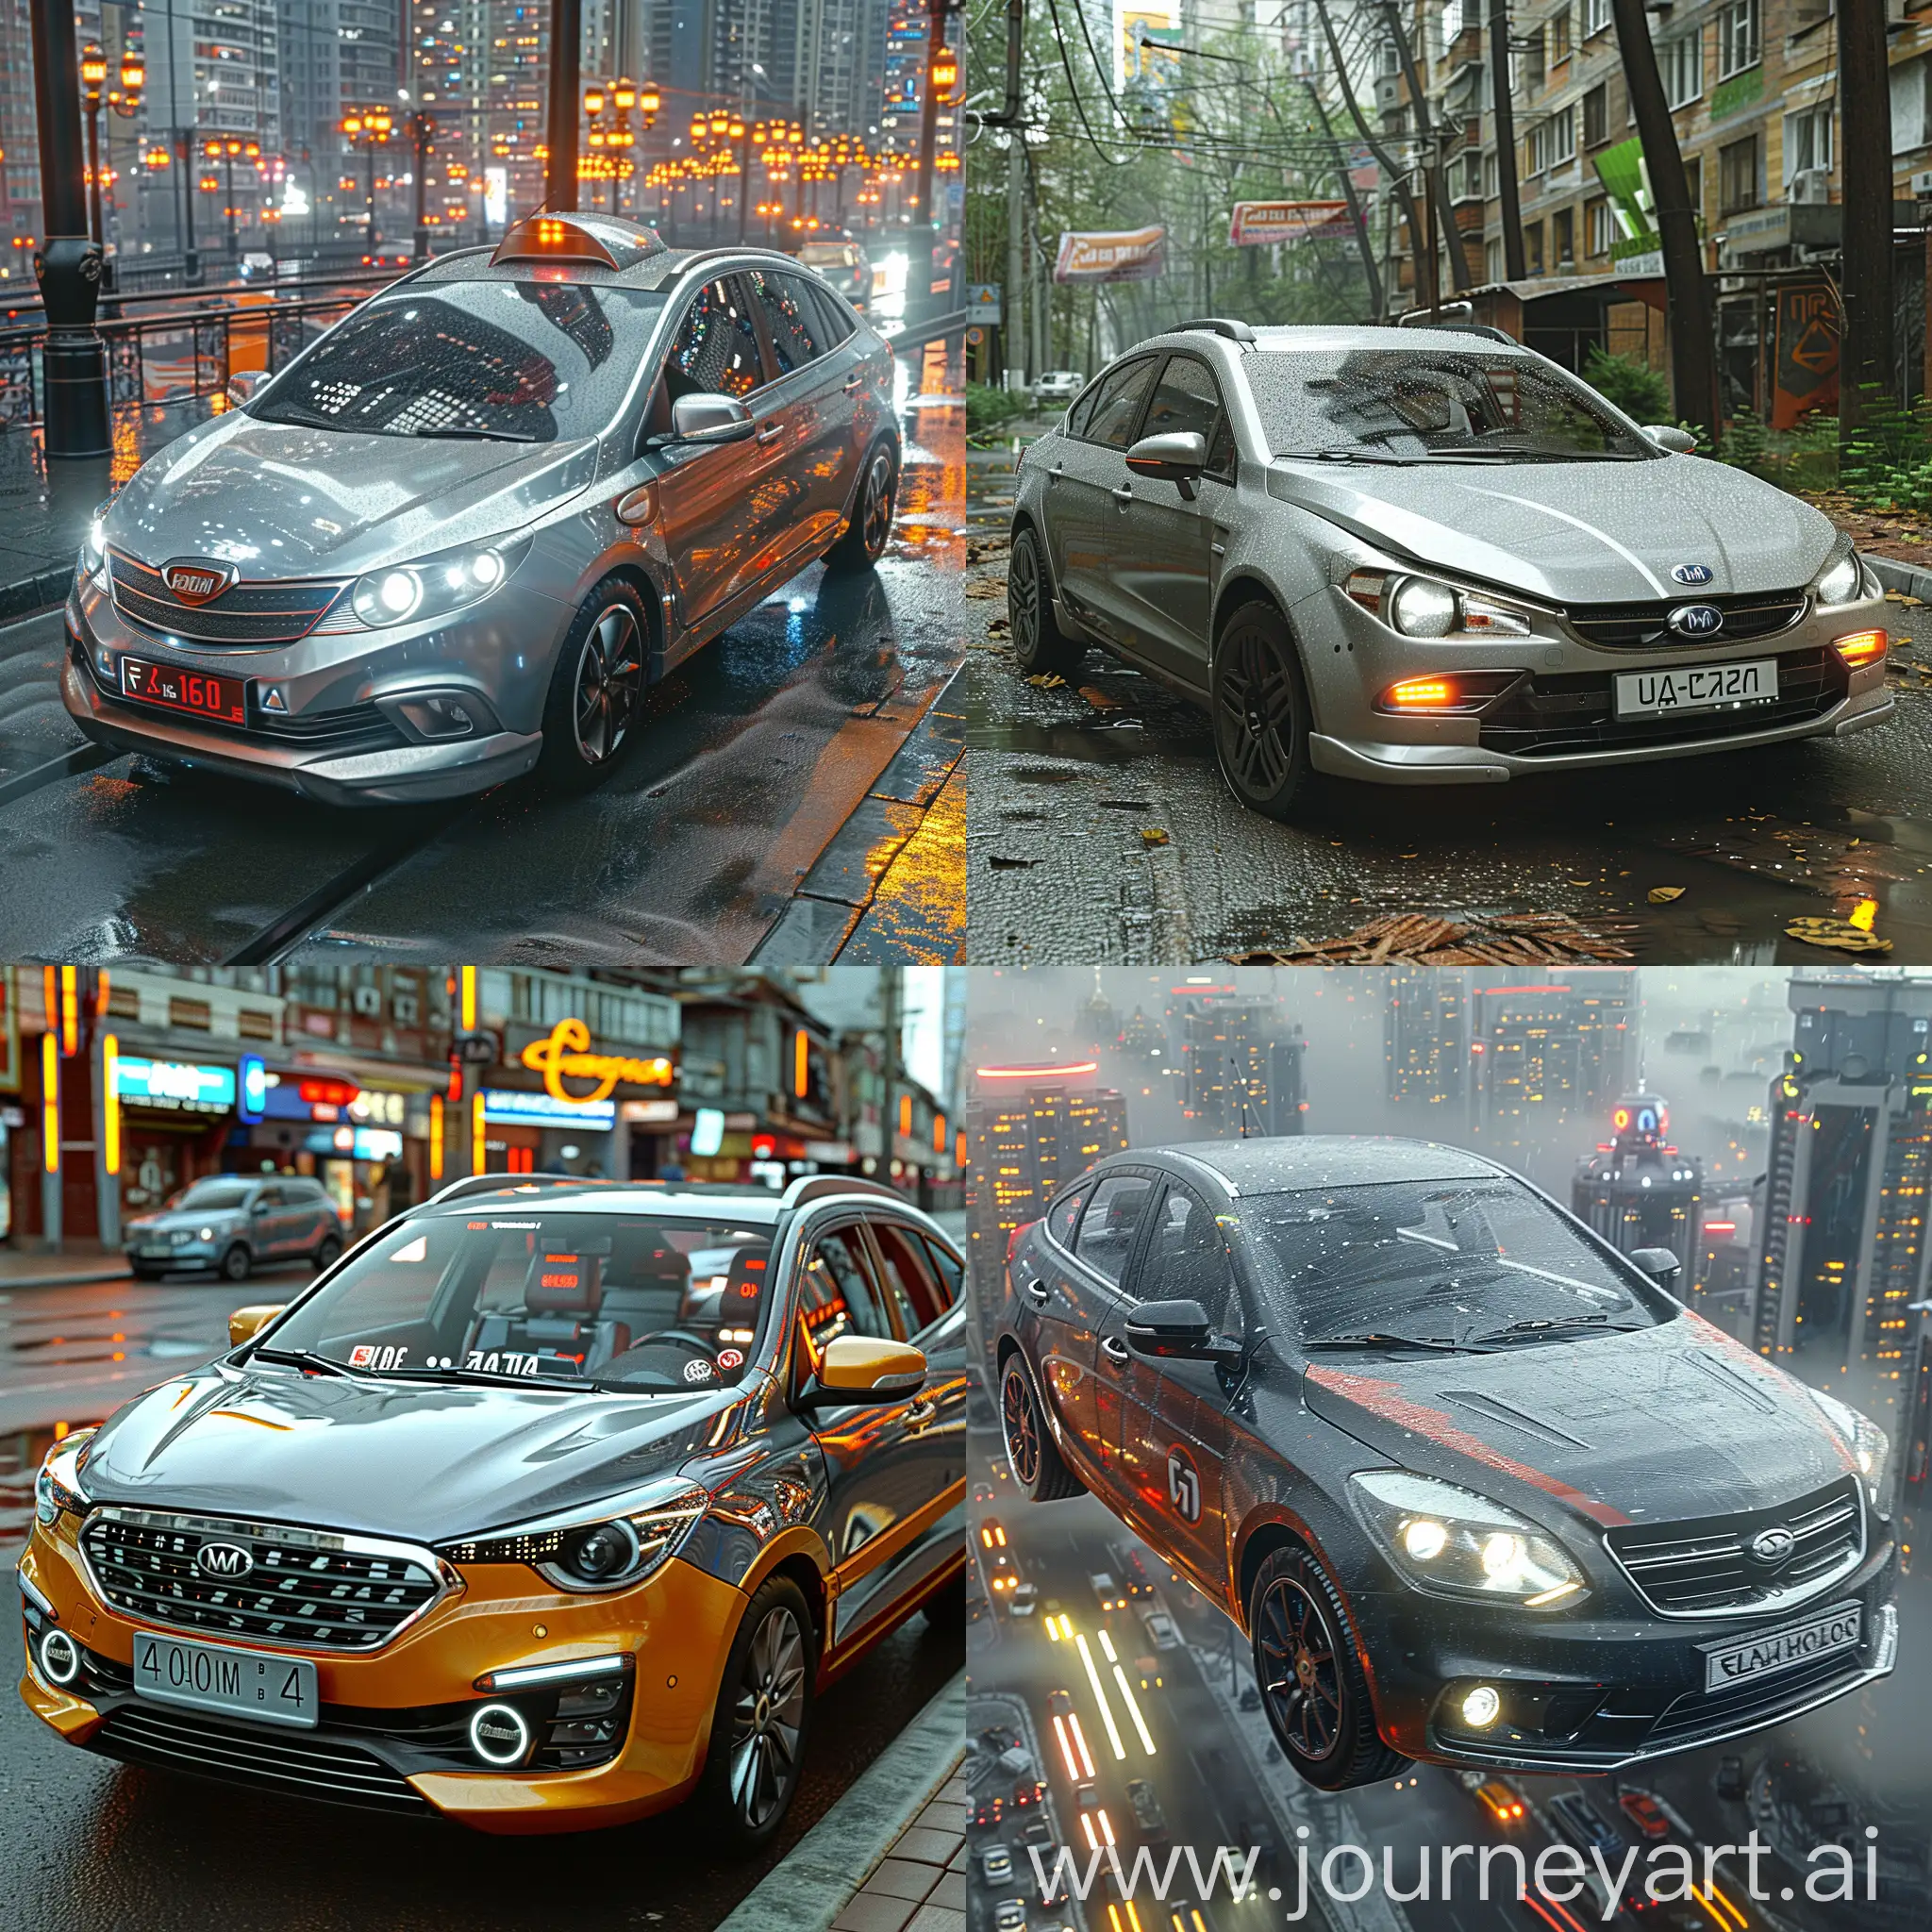 Futuristic:: sci-fi:: LADA Vesta https://upload.wikimedia.org/wikipedia/commons/thumb/8/85/Lada_Vesta_%28cropped%29.jpg/280px-Lada_Vesta_%28cropped%29.jpg, Self-driving capabilities. Augmented reality windshield, Biometric security system, Energy-efficient propulsion system, Holographic dashboard, Adaptive suspension system, Intelligent voice assistant, Health monitoring sensors, Self-healing body panels, Integrated drone delivery system, octane render --stylize 1000